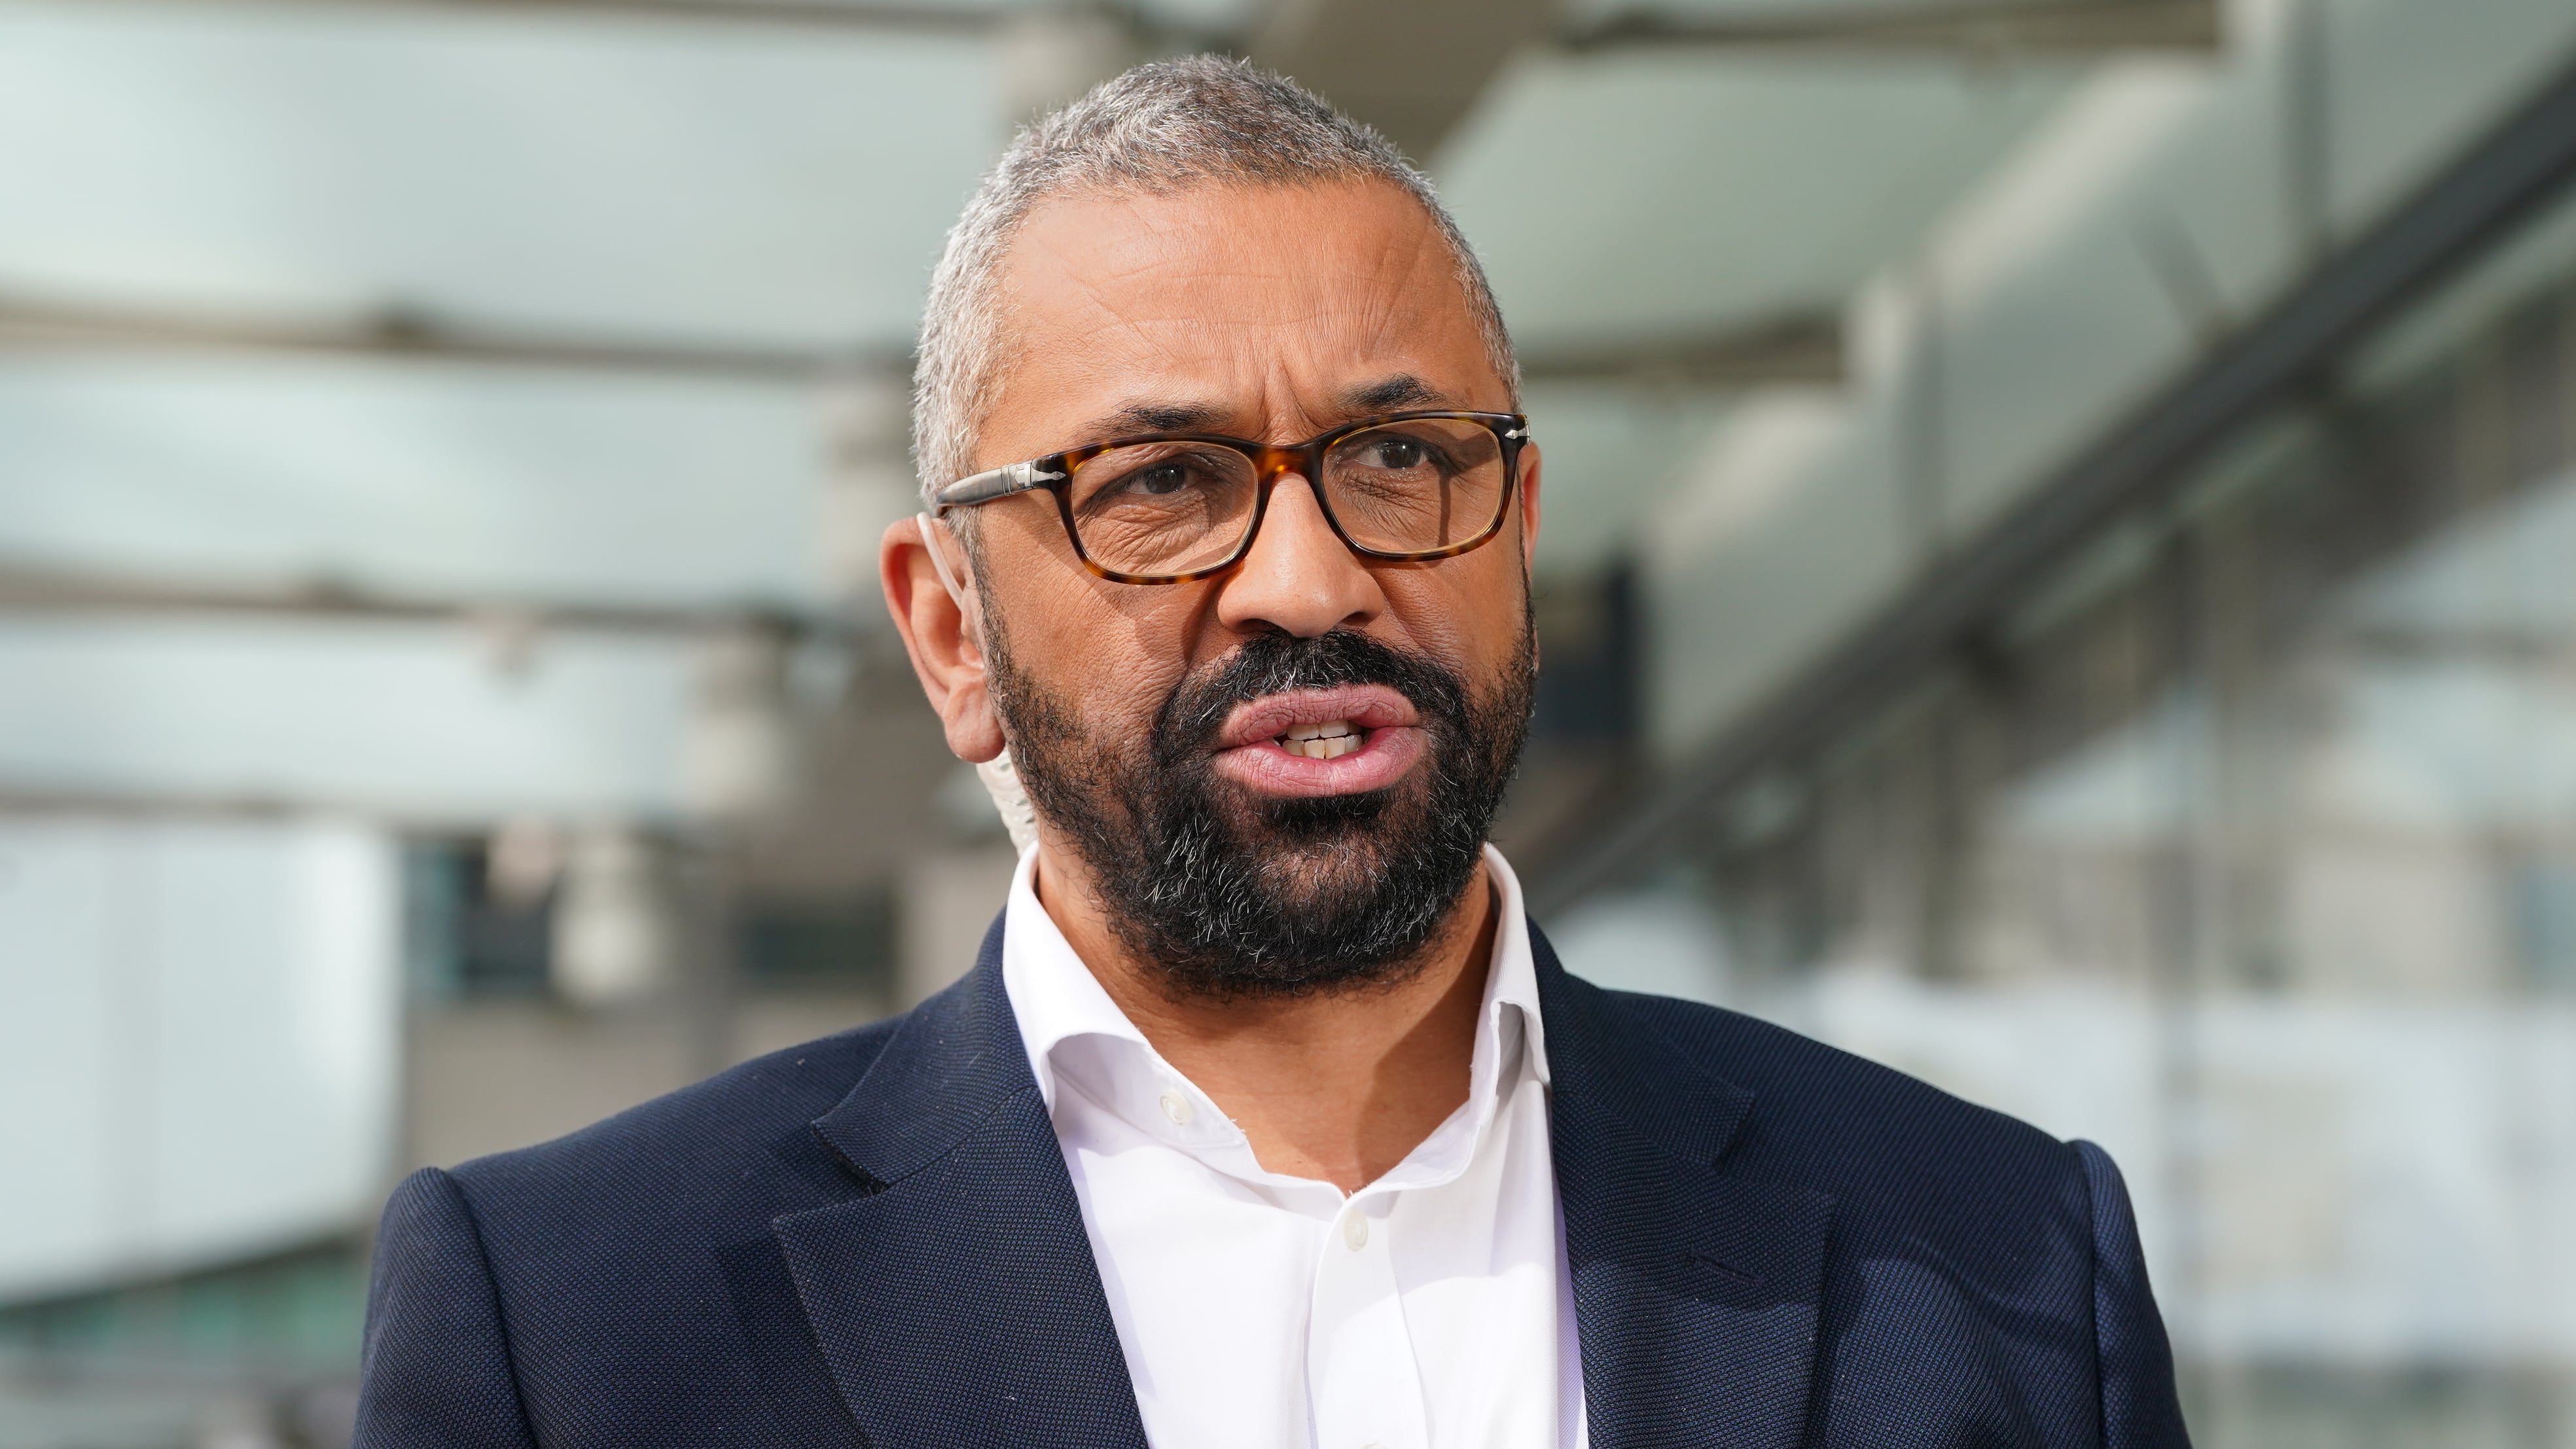 Home Secretary James Cleverly outside BBC Broadcasting House in London, after appearing on the BBC’s Sunday With Laura Kuenssberg programme